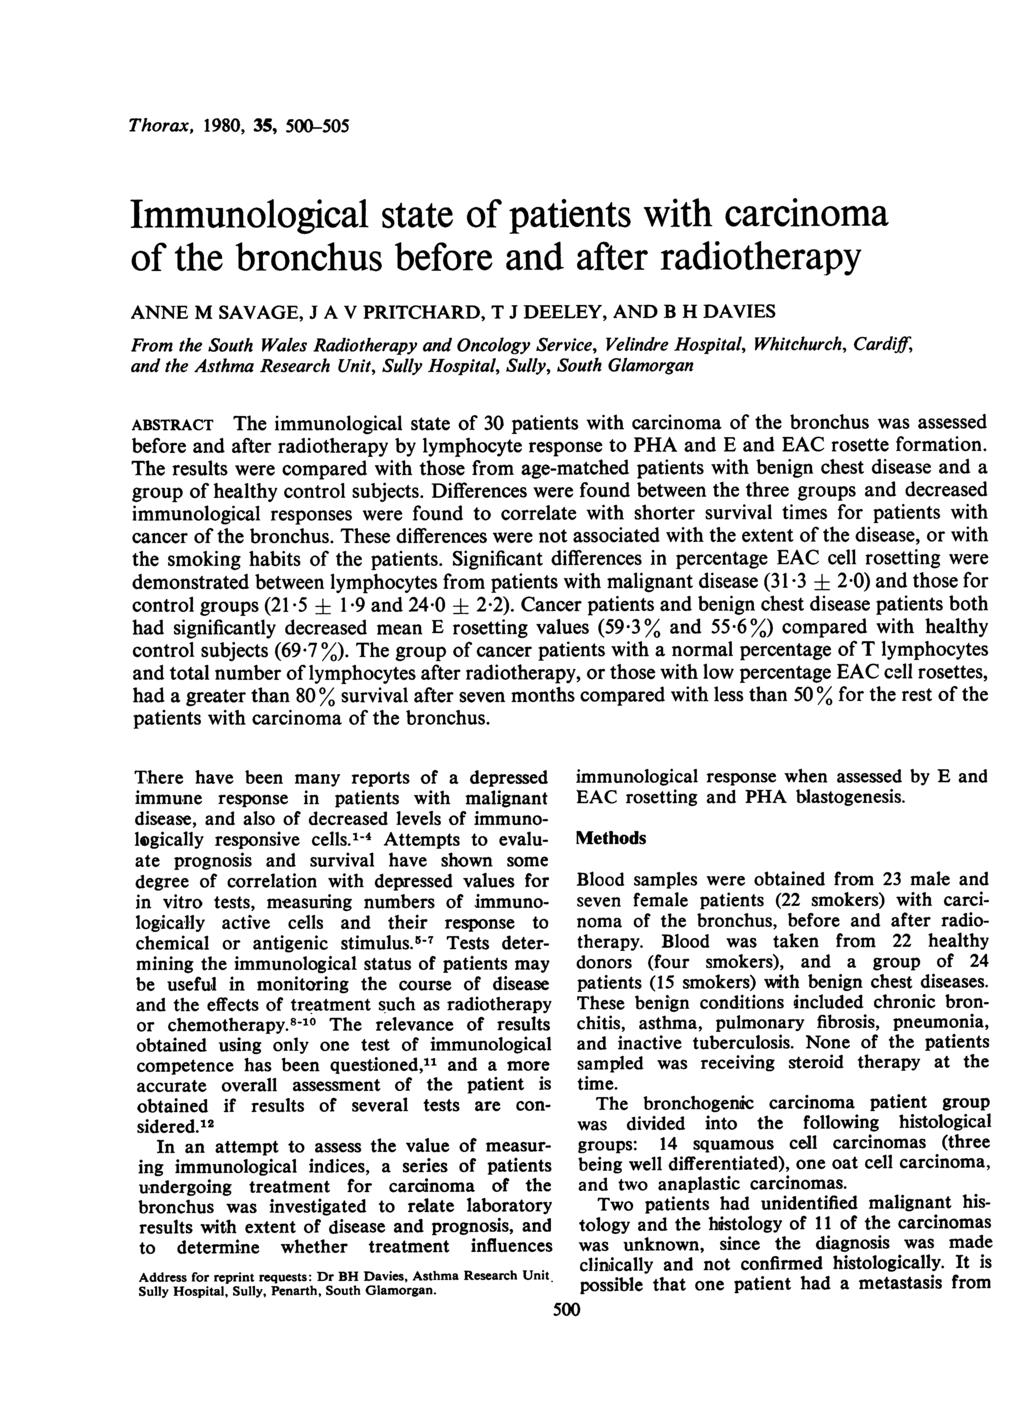 Thorax, 1980, 35, 500-505 Immunological state of patients with carcinoma of the bronchus before and after radiotherapy ANNE M SAVAGE, J A V PRITCHARD, T J DEELEY, AND B H DAVIES From the South Wales